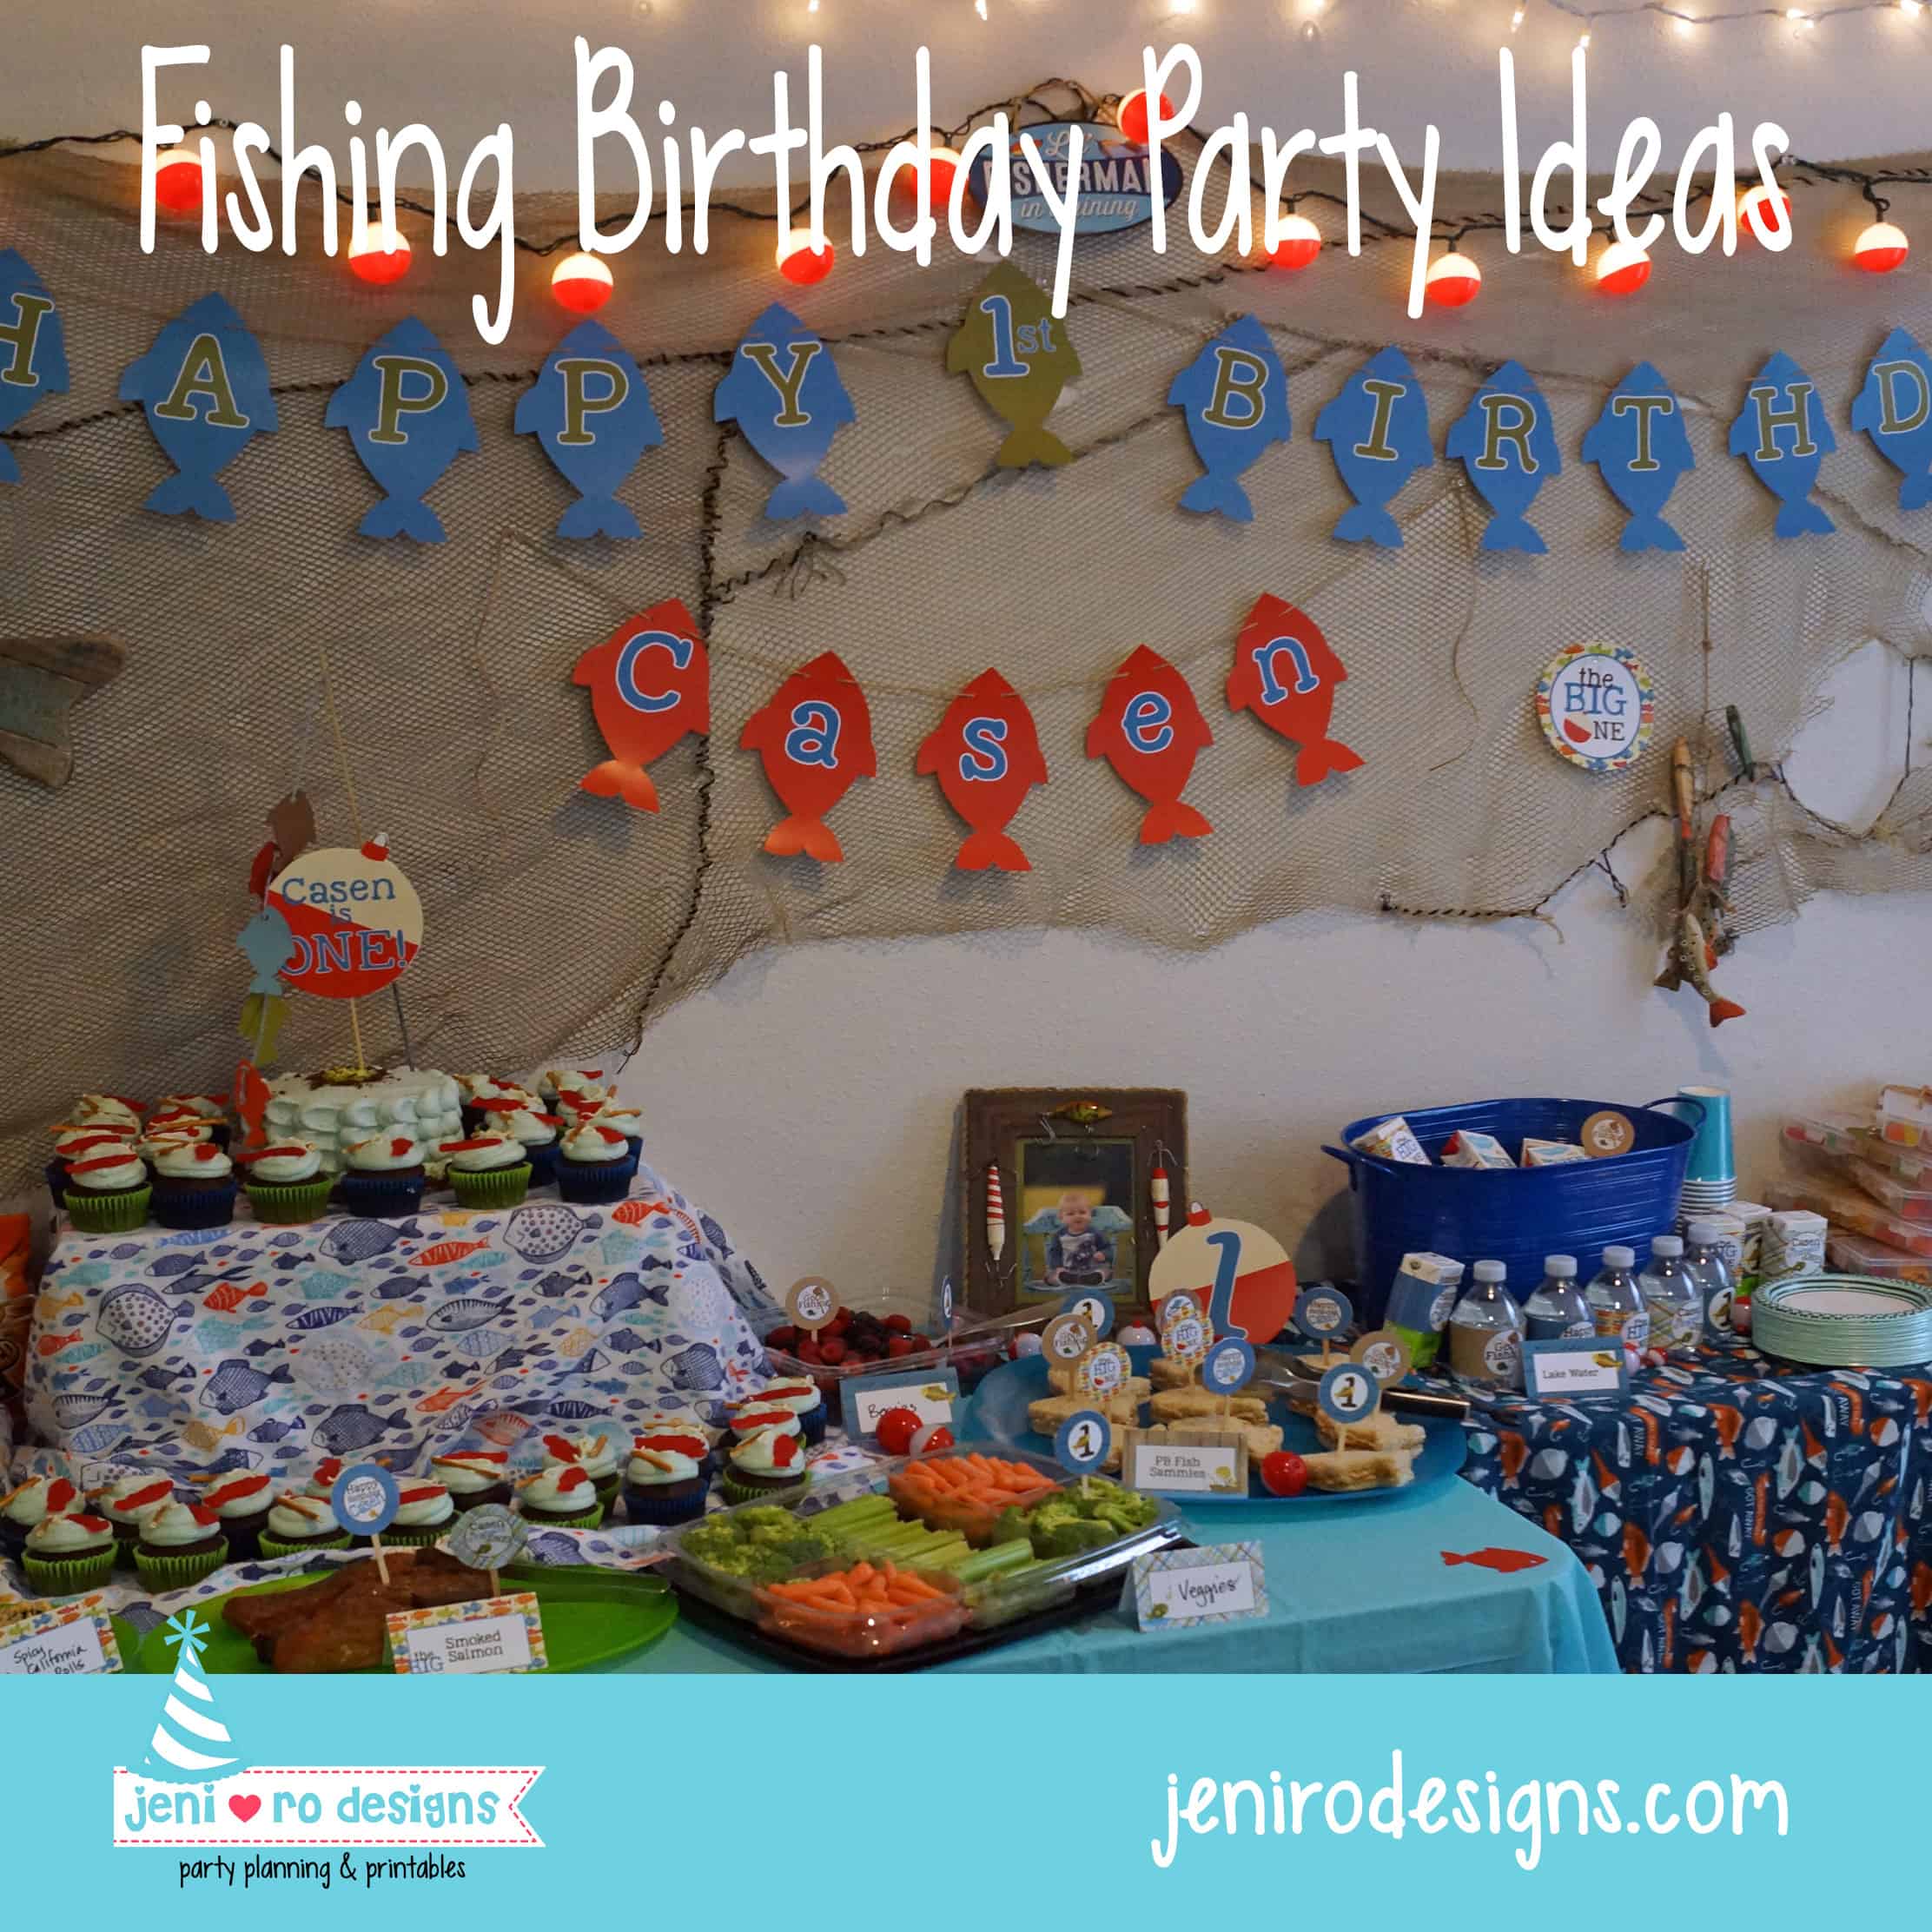 The Perfect Party Favors for A Kids Fishing Party  Fishing birthday party,  Fishing themed birthday party, Fishing birthday